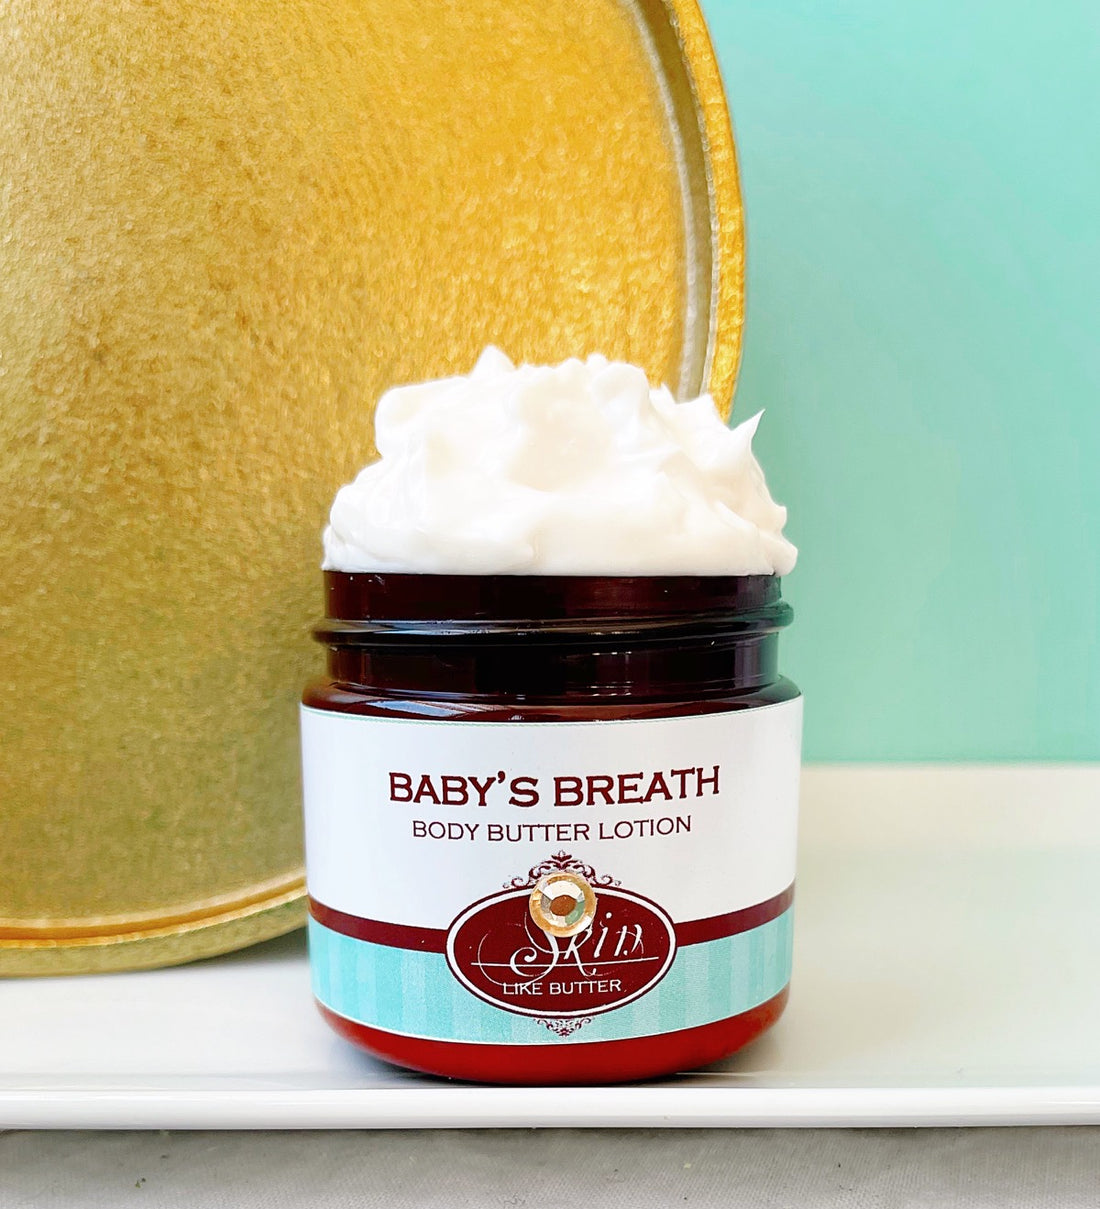 BABY'S BREATH scented water free, vegan non-greasy Skin Like Butter Body Butter